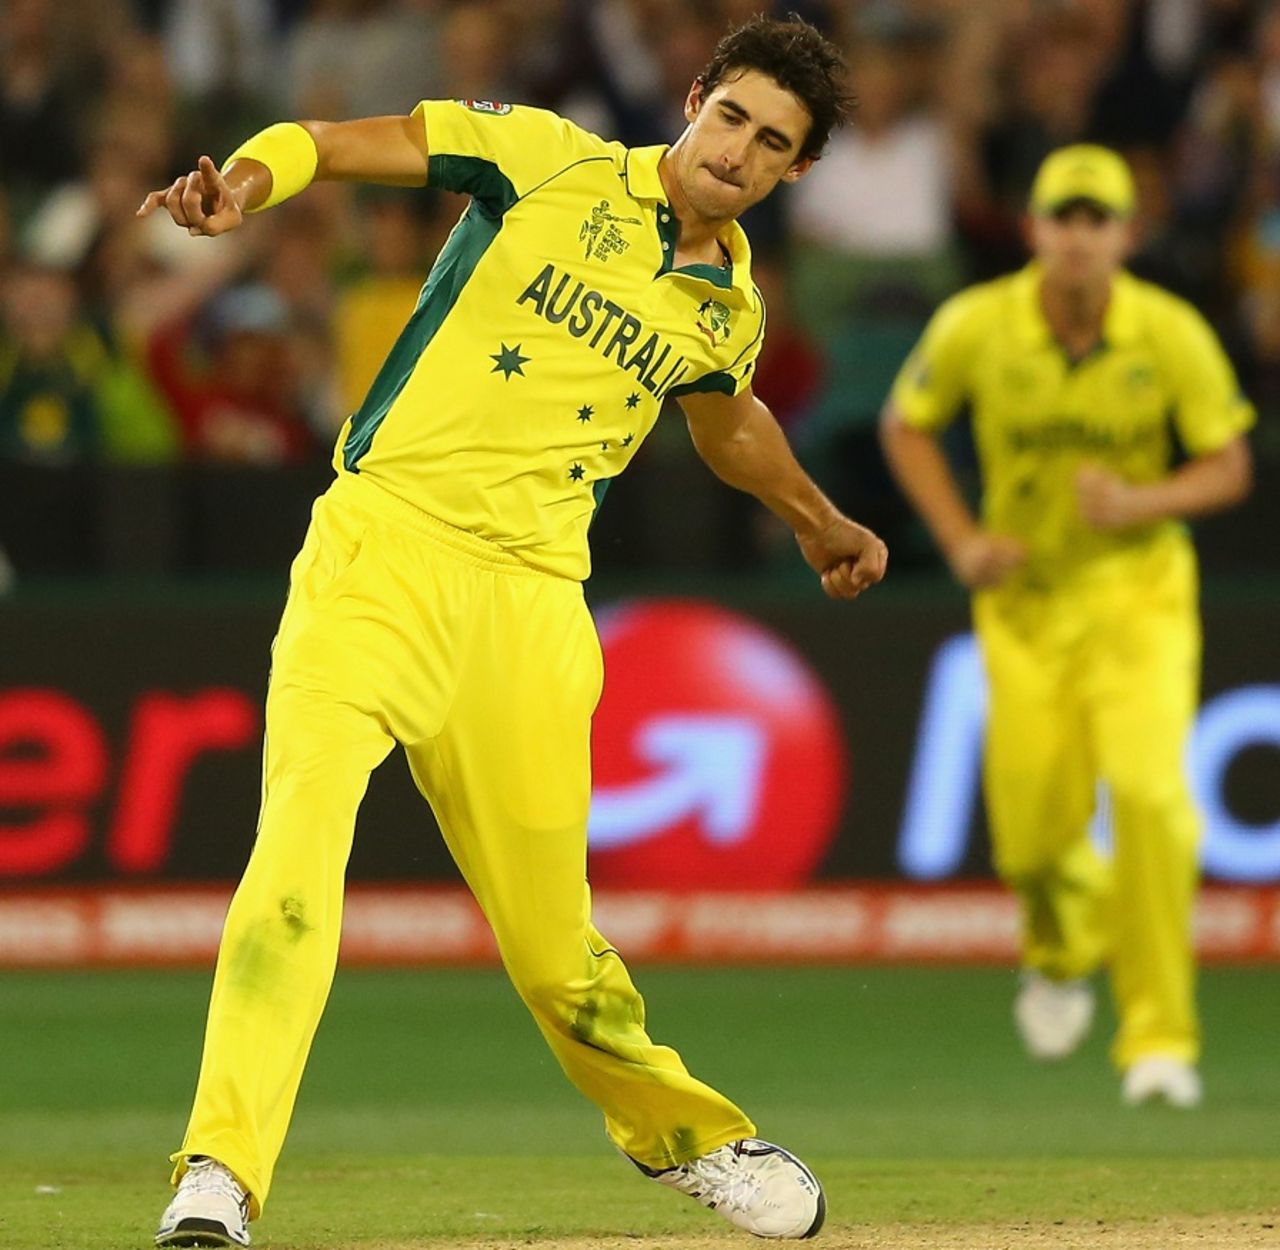 Mitchell Starc is gung ho after bowling Stuart Broad for a golden duck, Australia v England, Group A, World Cup 2015, Melbourne, February 14, 2015